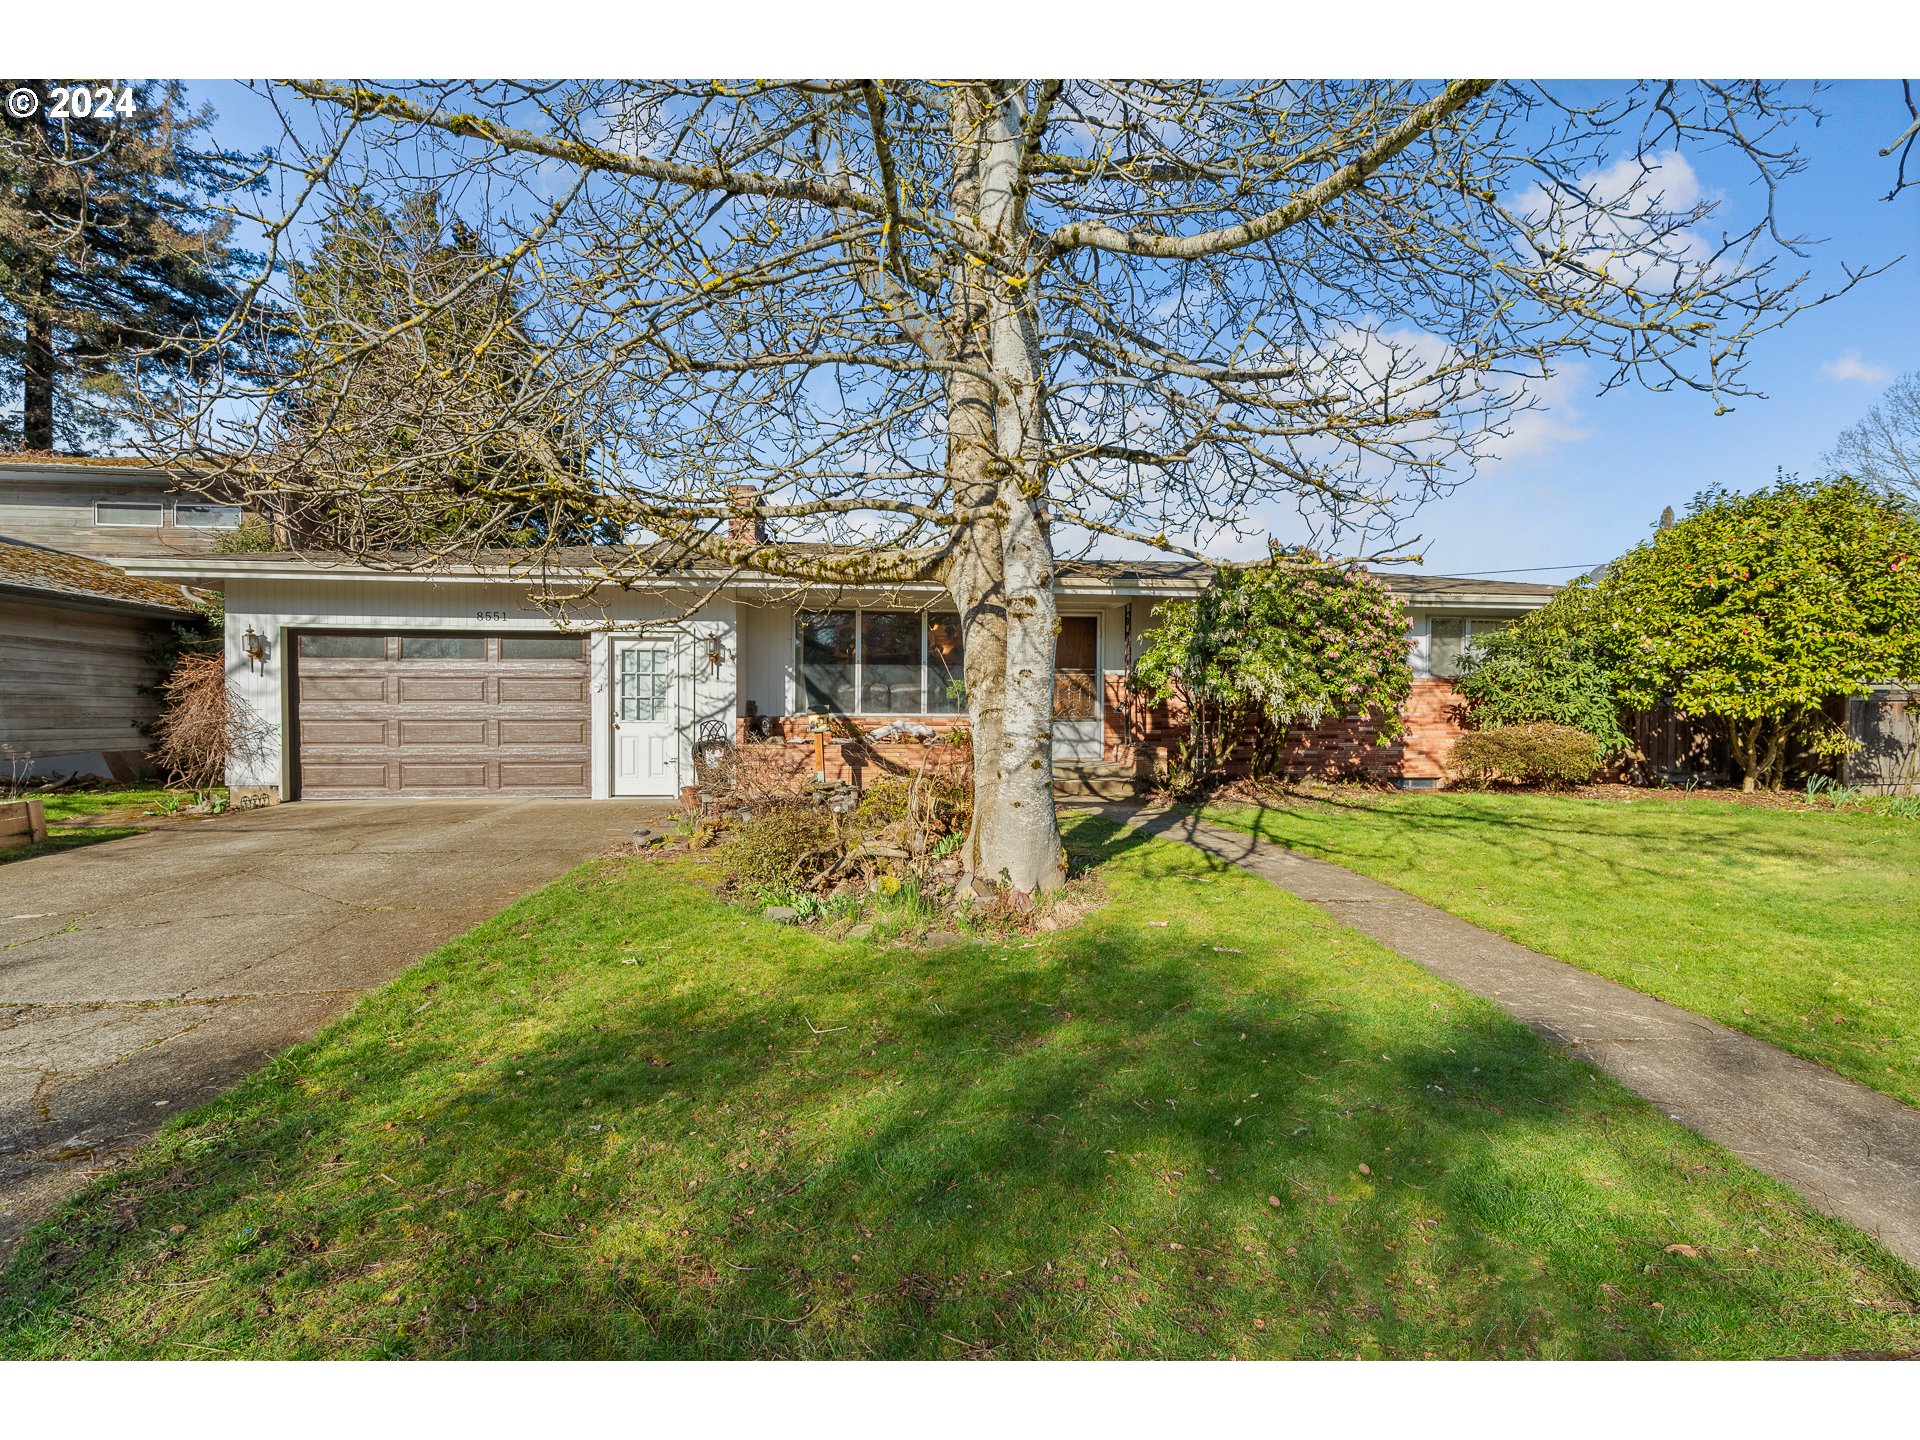 8551 SE 34TH AVE, Milwaukie, OR 